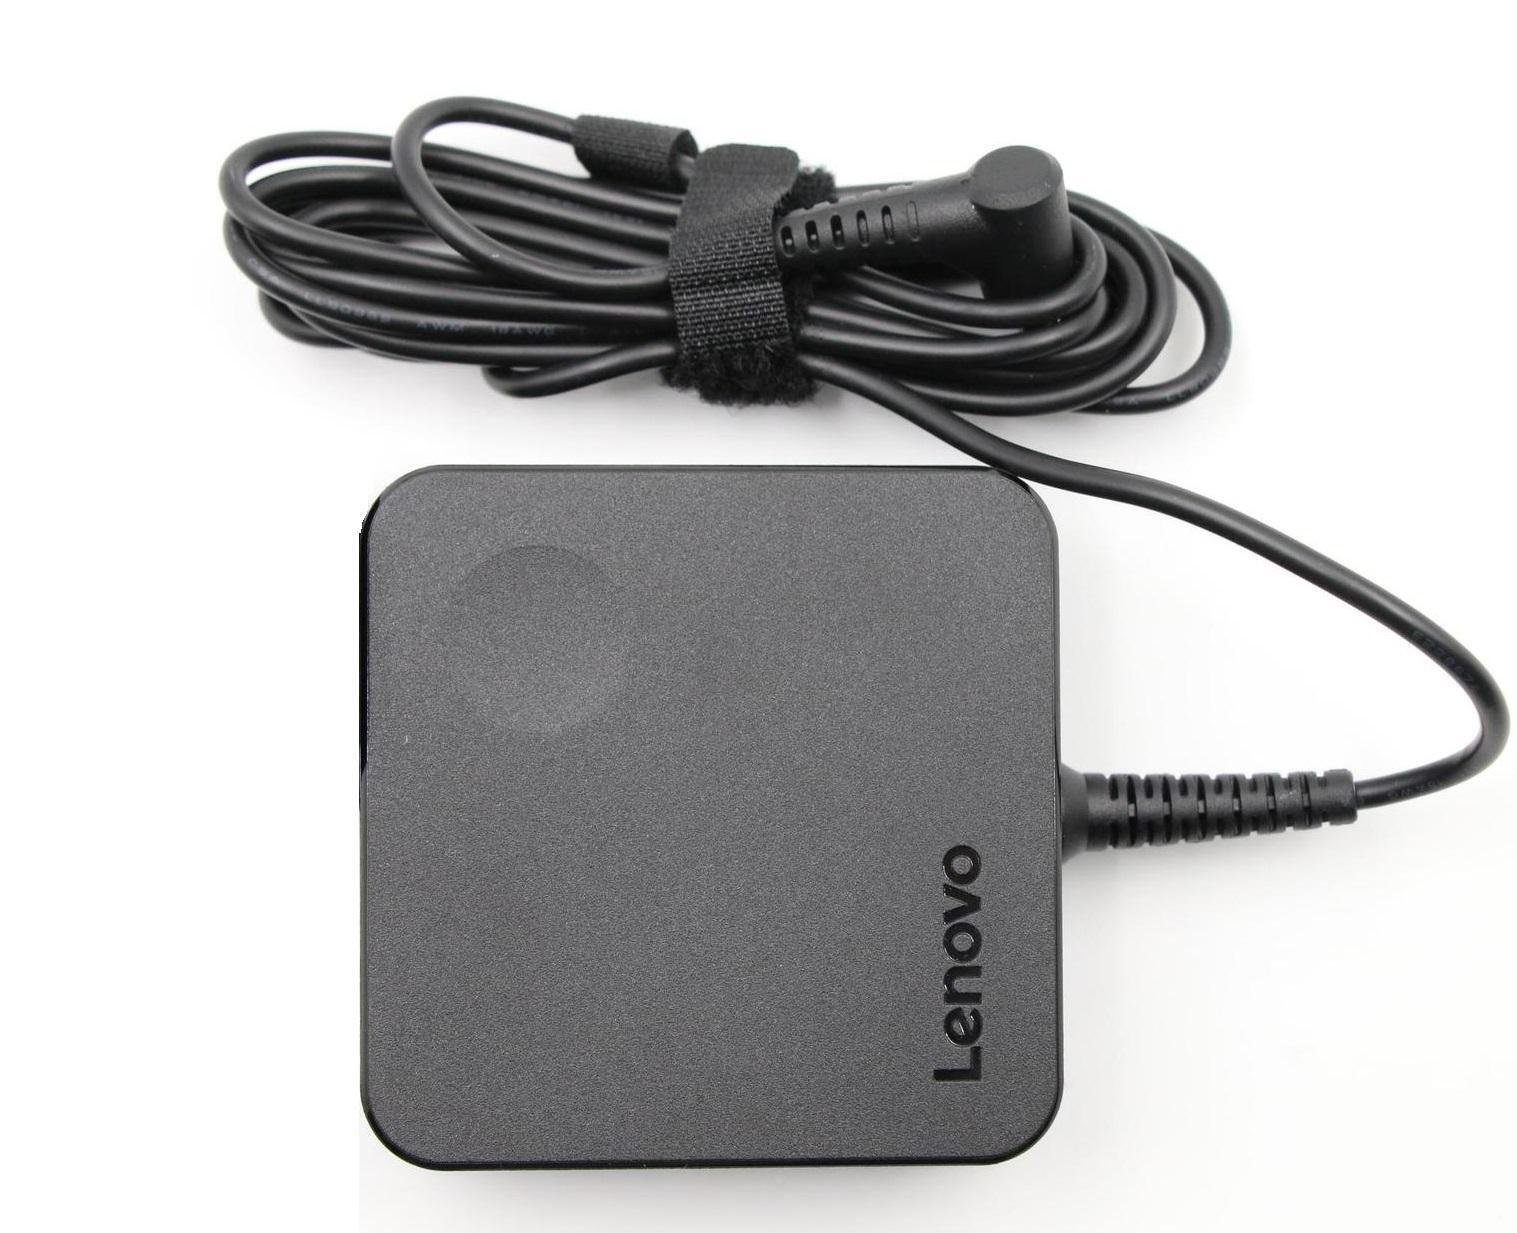 LENOVO IdeaPad 110-15ACL 80TJ Genuine Original AC Power Adapter Charger